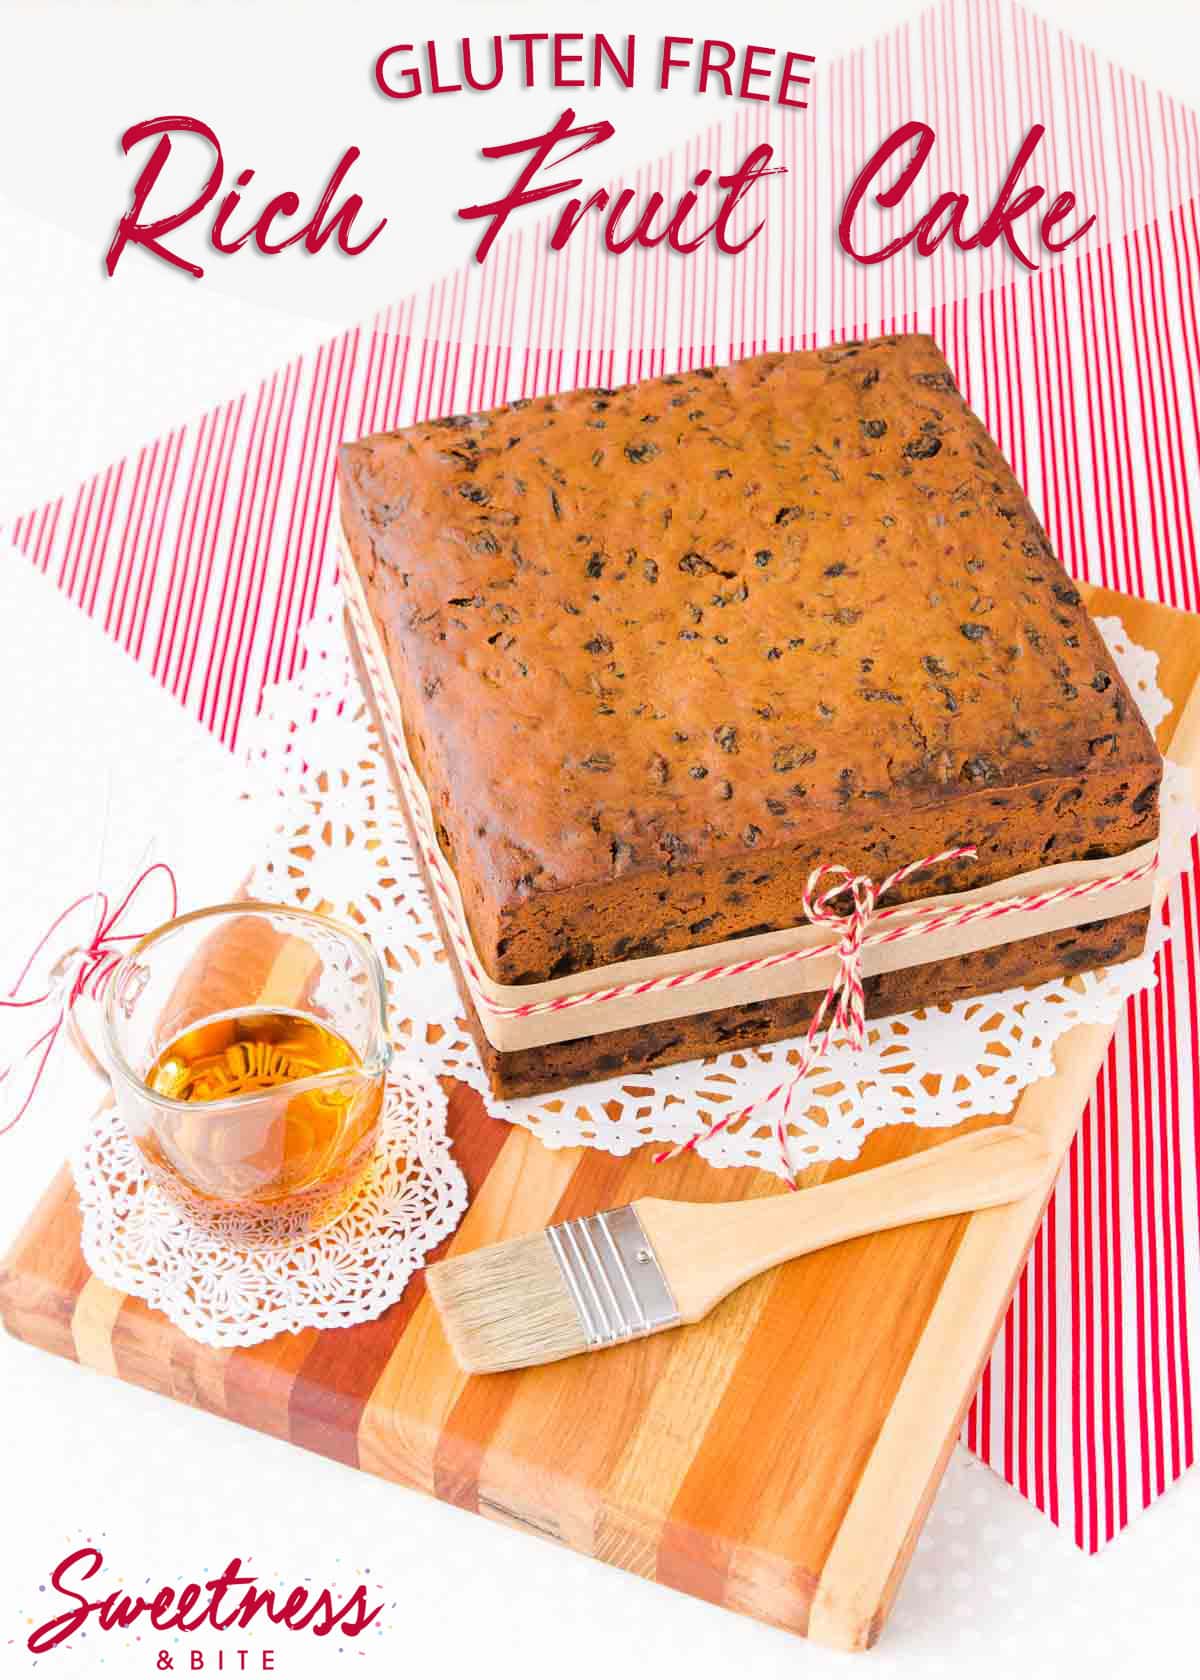 Square gluten free fruit cake on a wooden board, sitting on a red and white striped cloth, with a glass jug of brandy and a pastry brush.